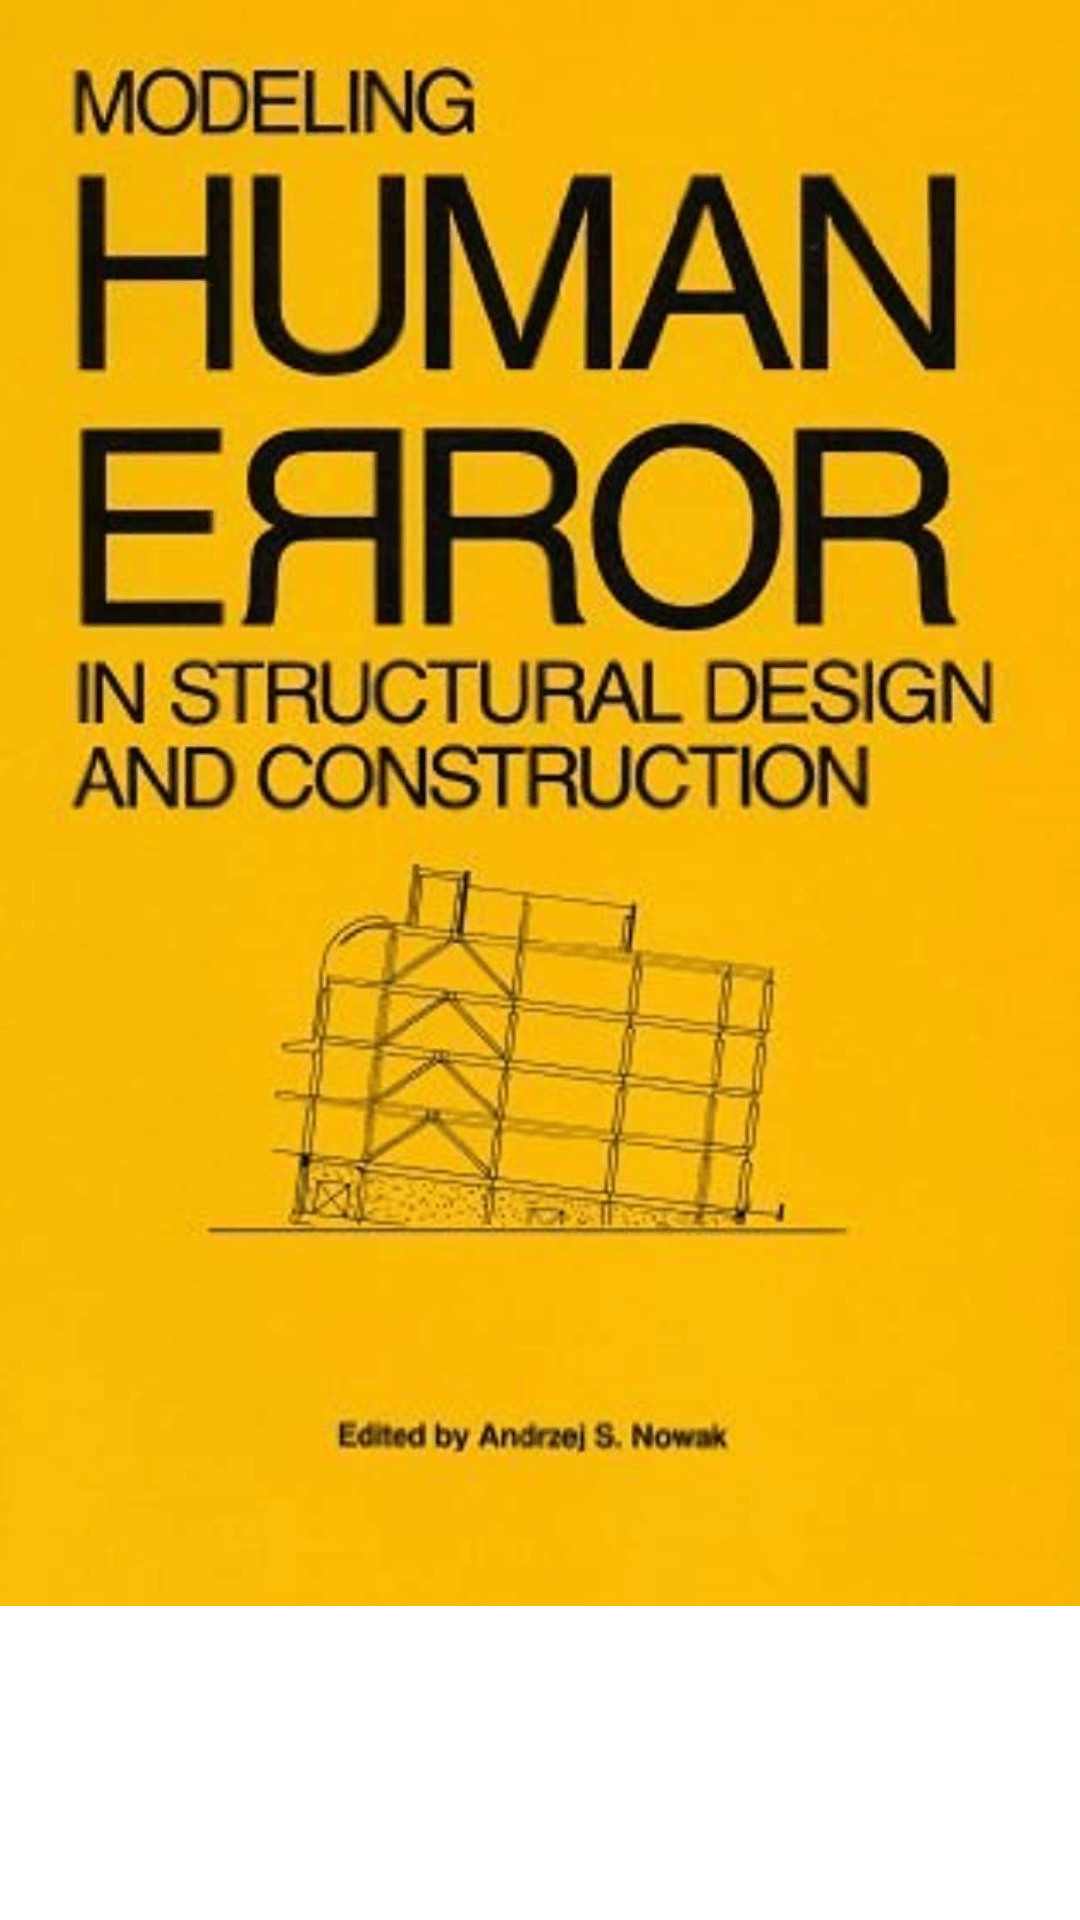 Modeling Human Error In Structural Design And Construction